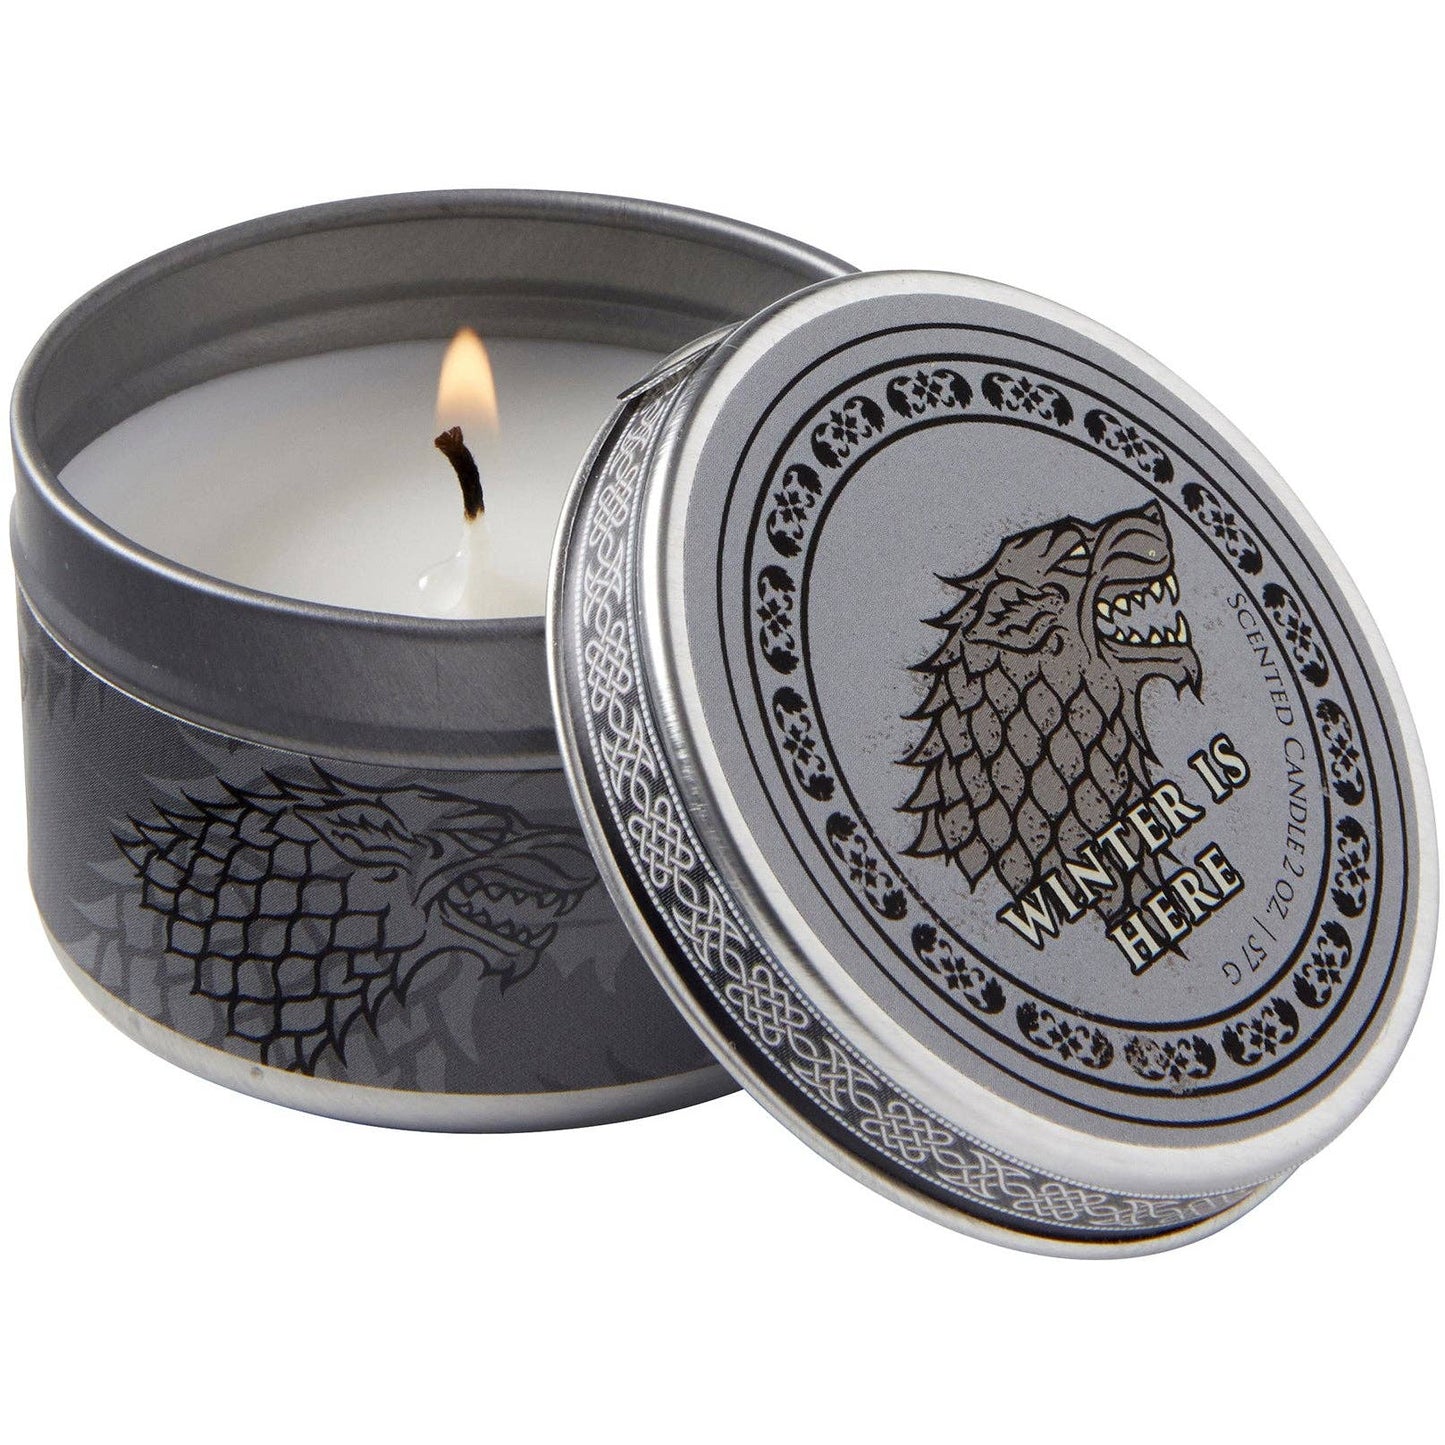 Game of Thrones House Stark Frosted Pine Scented Candle (2 oz.) by Insight Luminaries